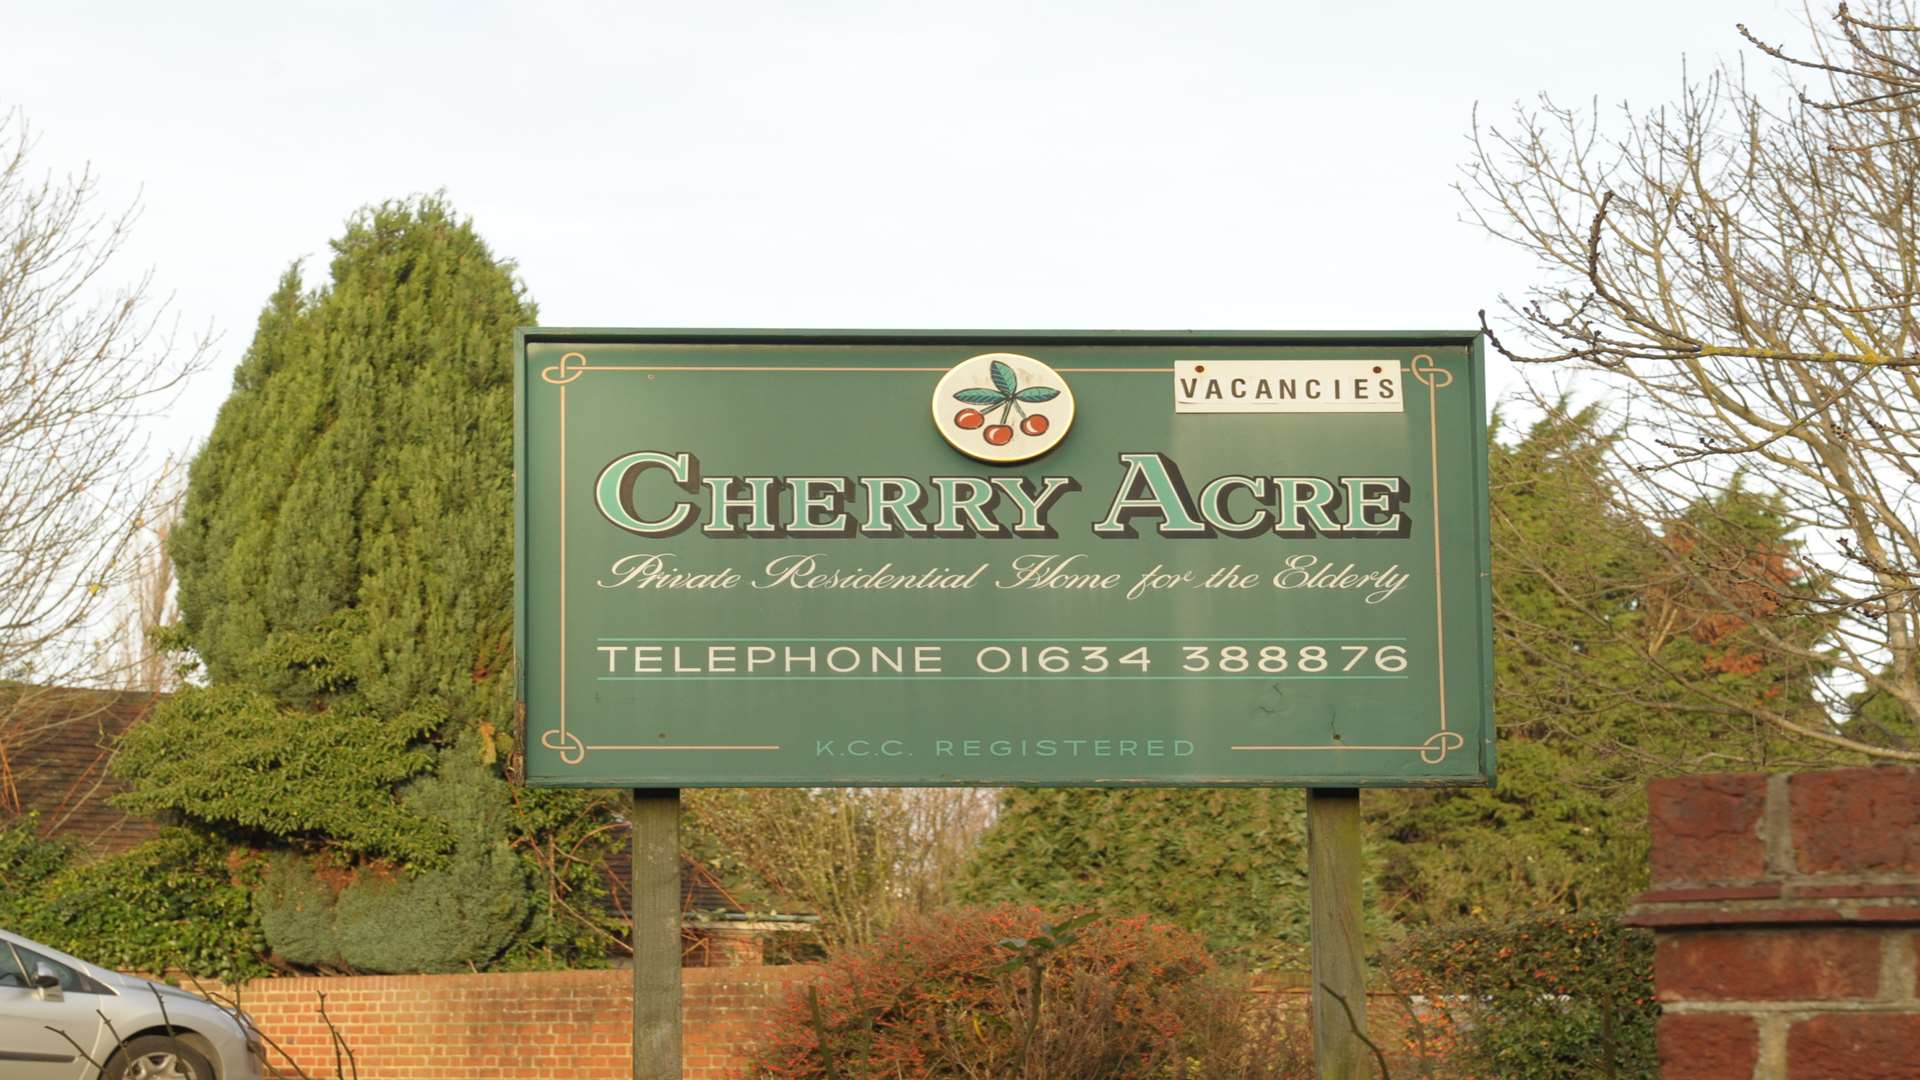 Cherry Acre Residential Home